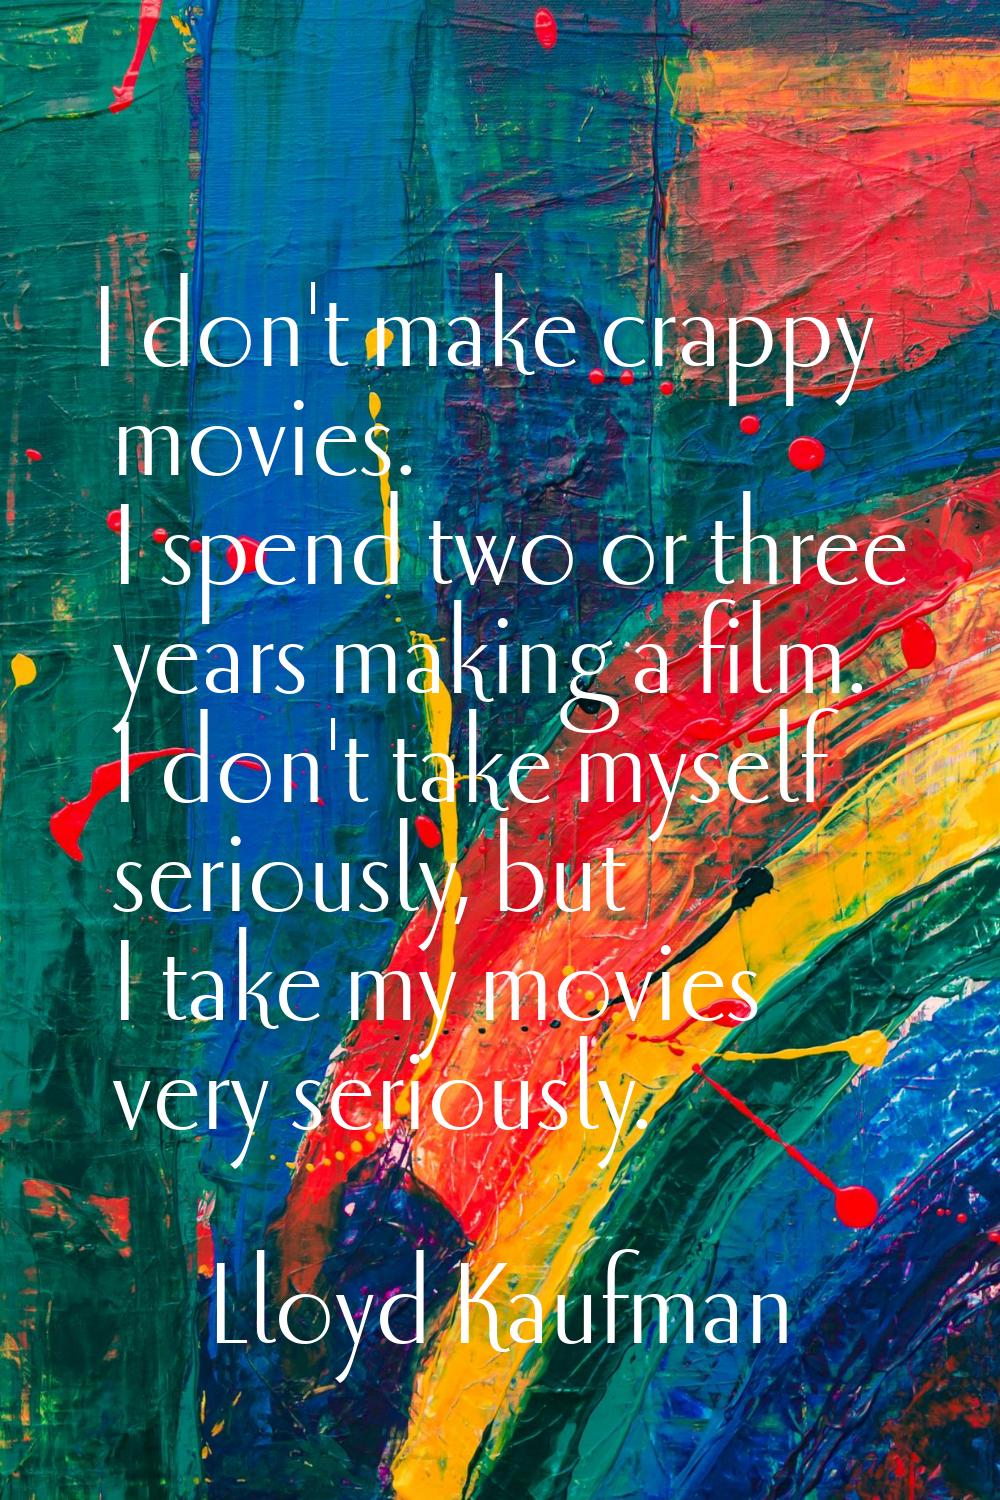 I don't make crappy movies. I spend two or three years making a film. I don't take myself seriously